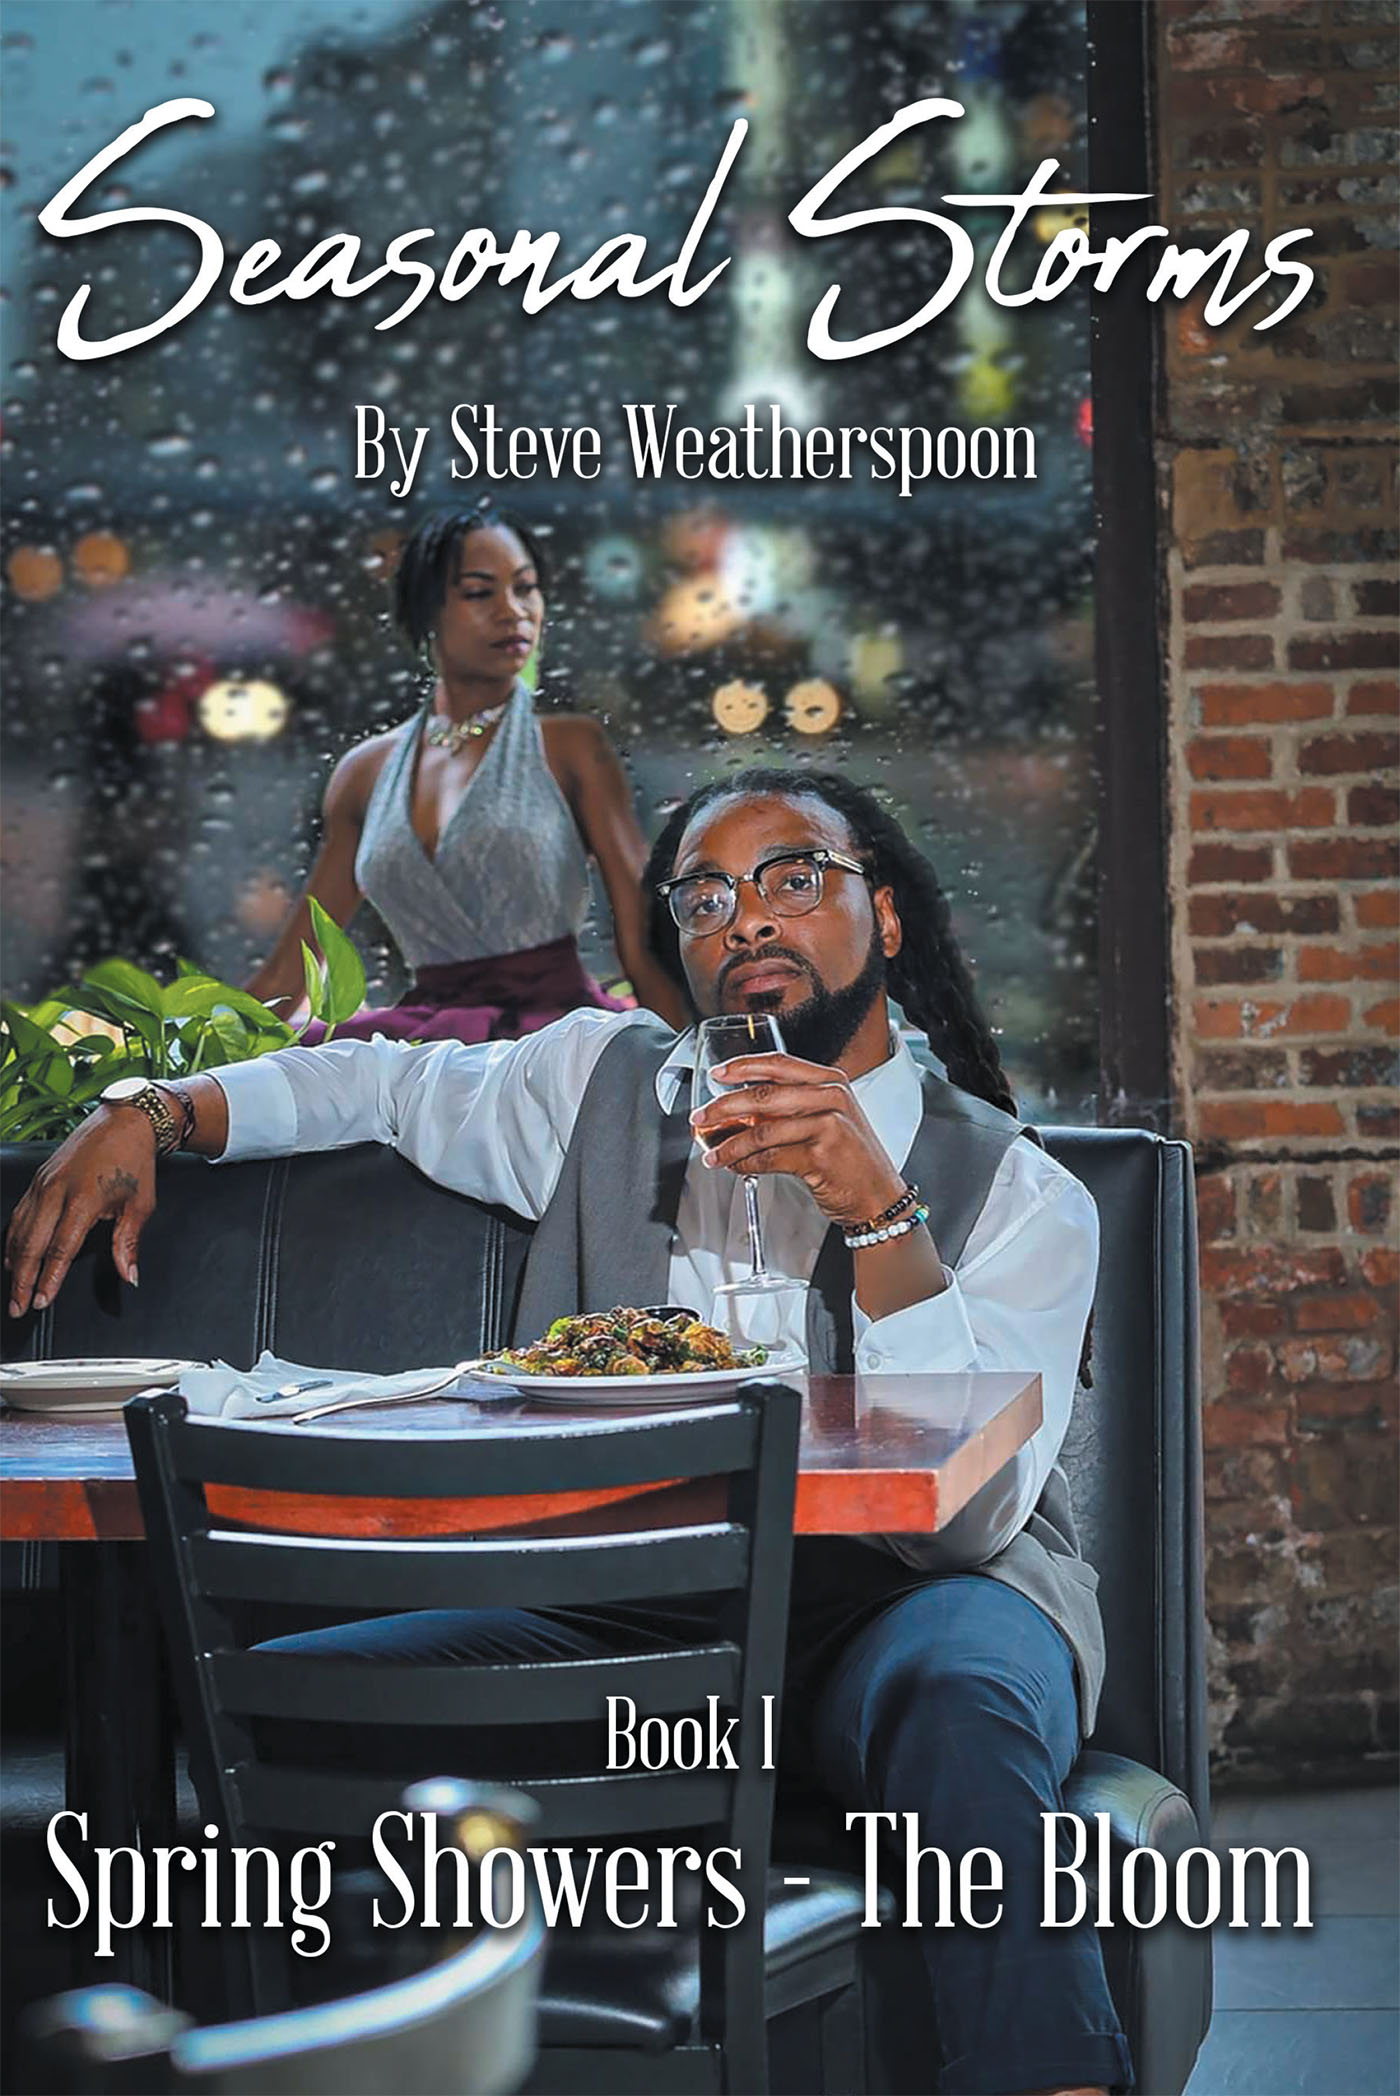 Steve Weatherspoon’s New Book, "Seasonal Storms: Autumn Downpours," is a Moving and Heartfelt Novel That Concludes the Passionate Love Story of Jaron and Makayla